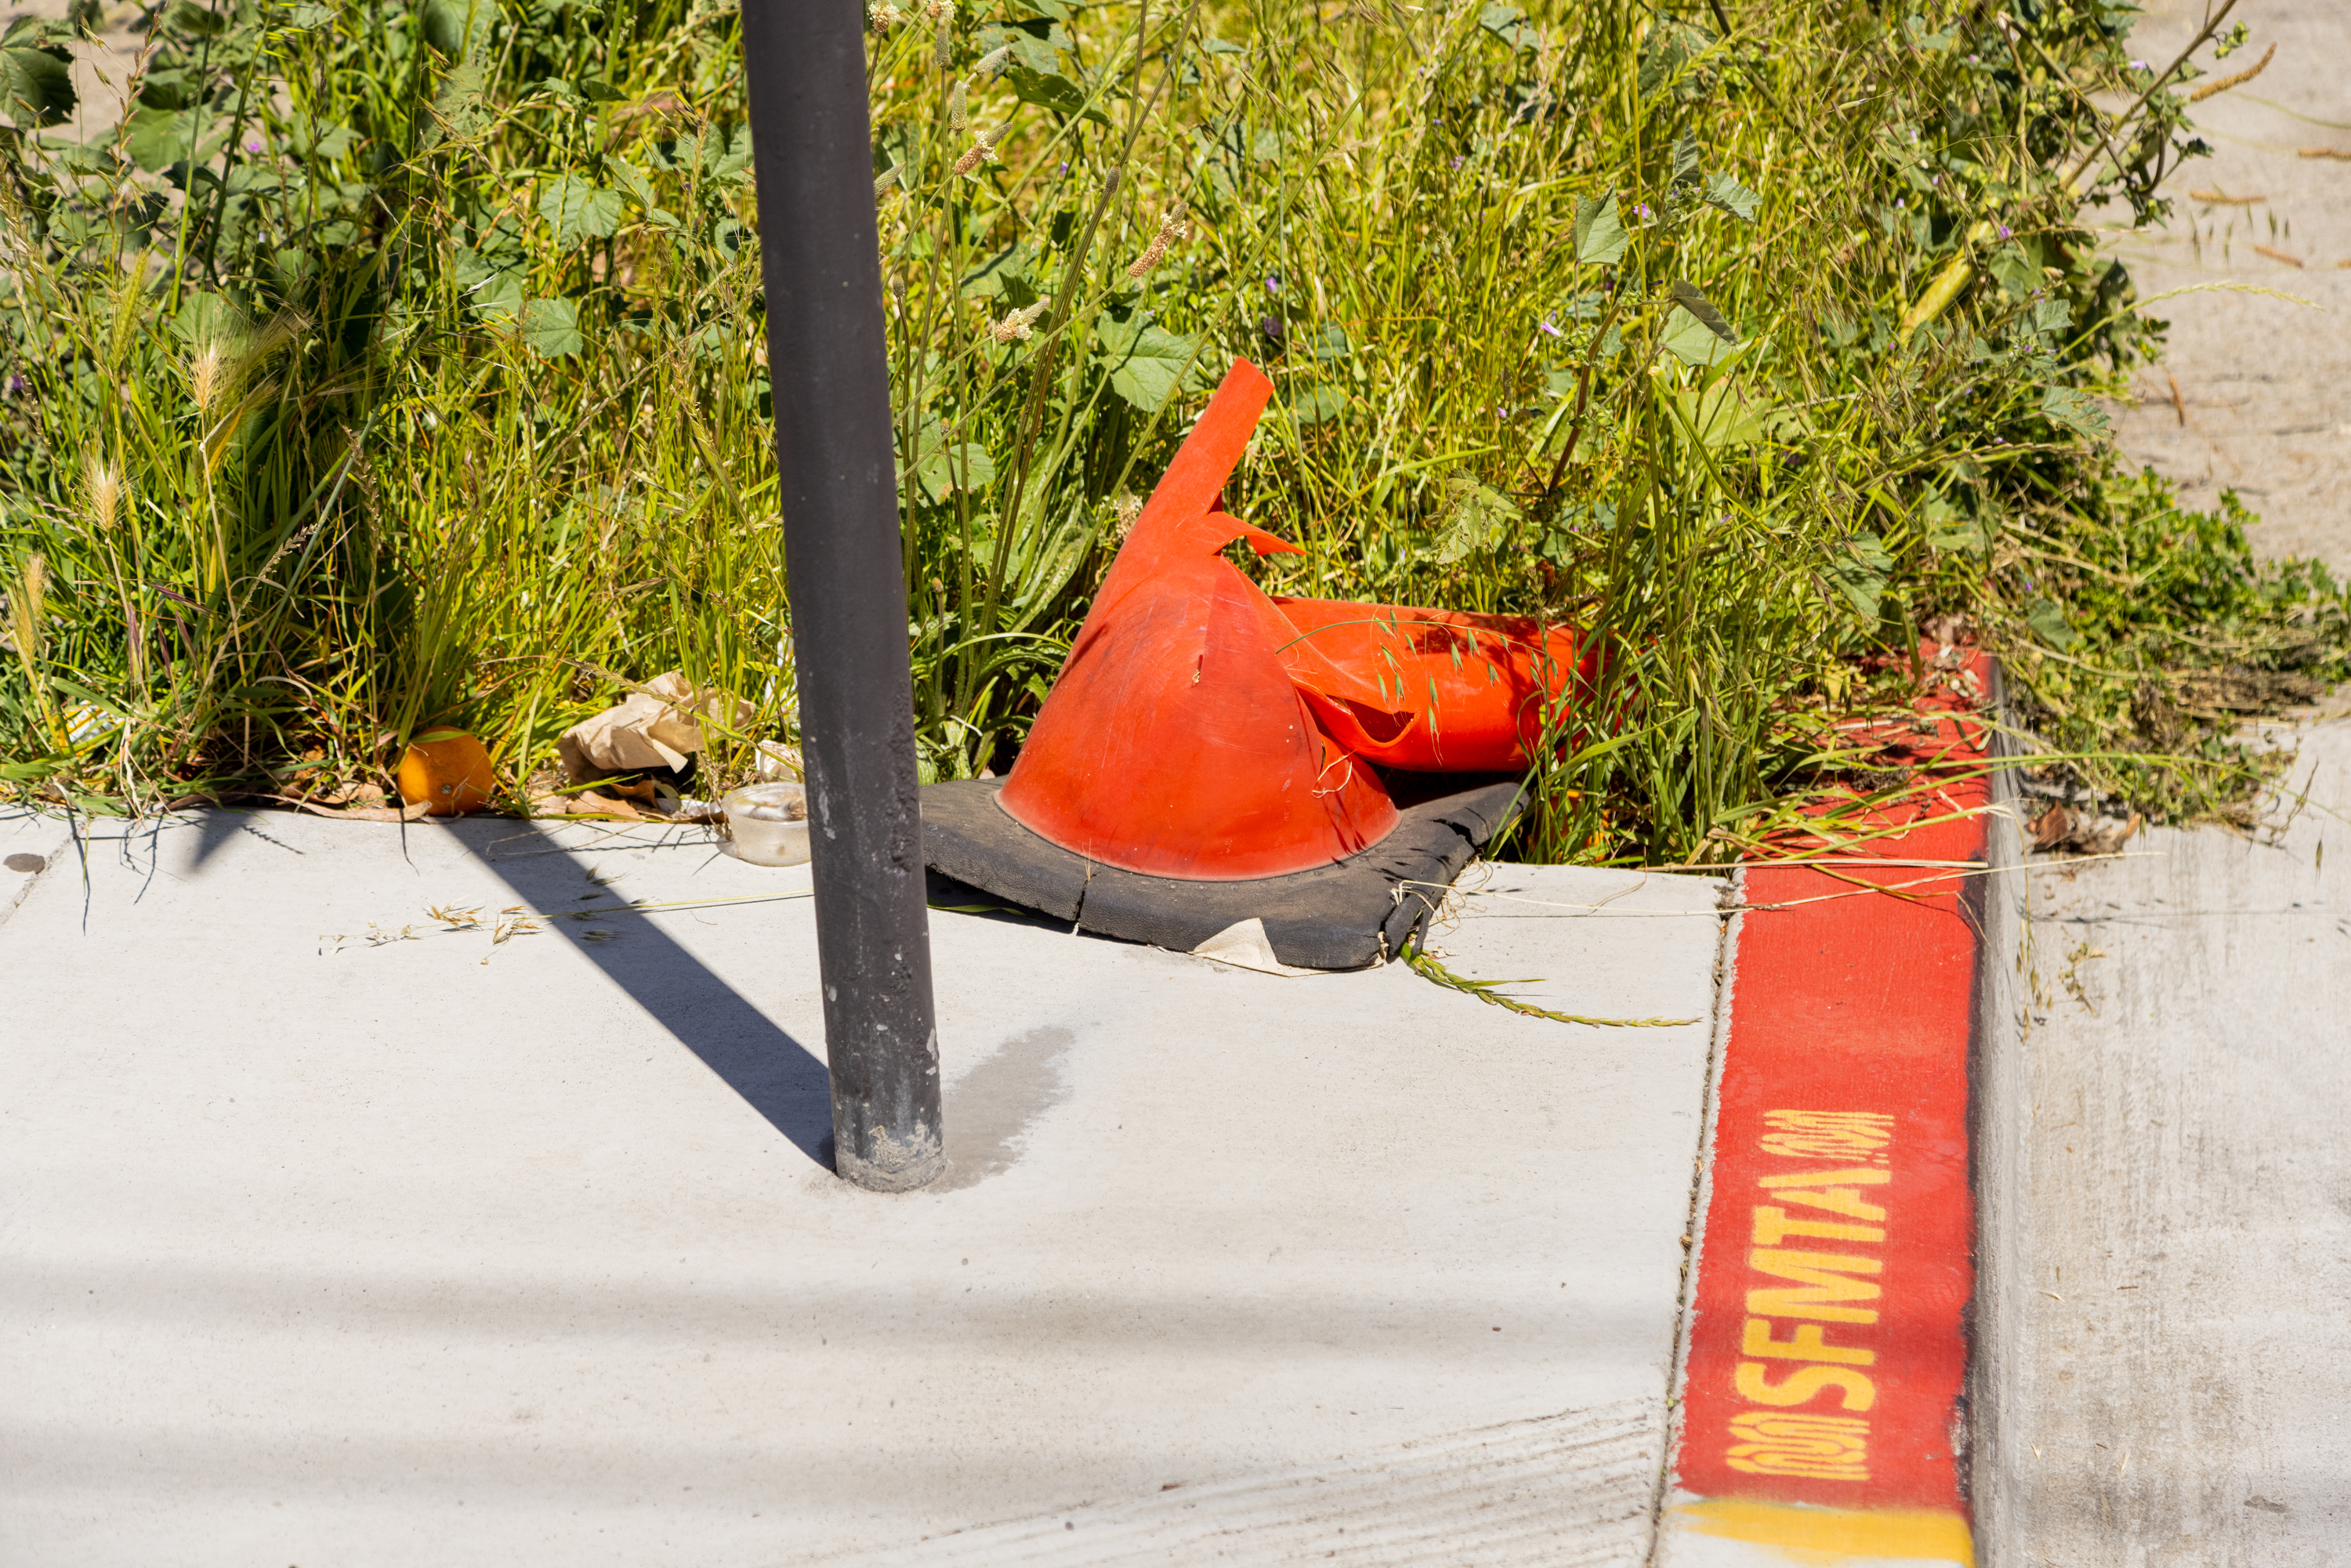 A crushed orange traffic cone lies beside a pole, surrounded by overgrown grass and debris.